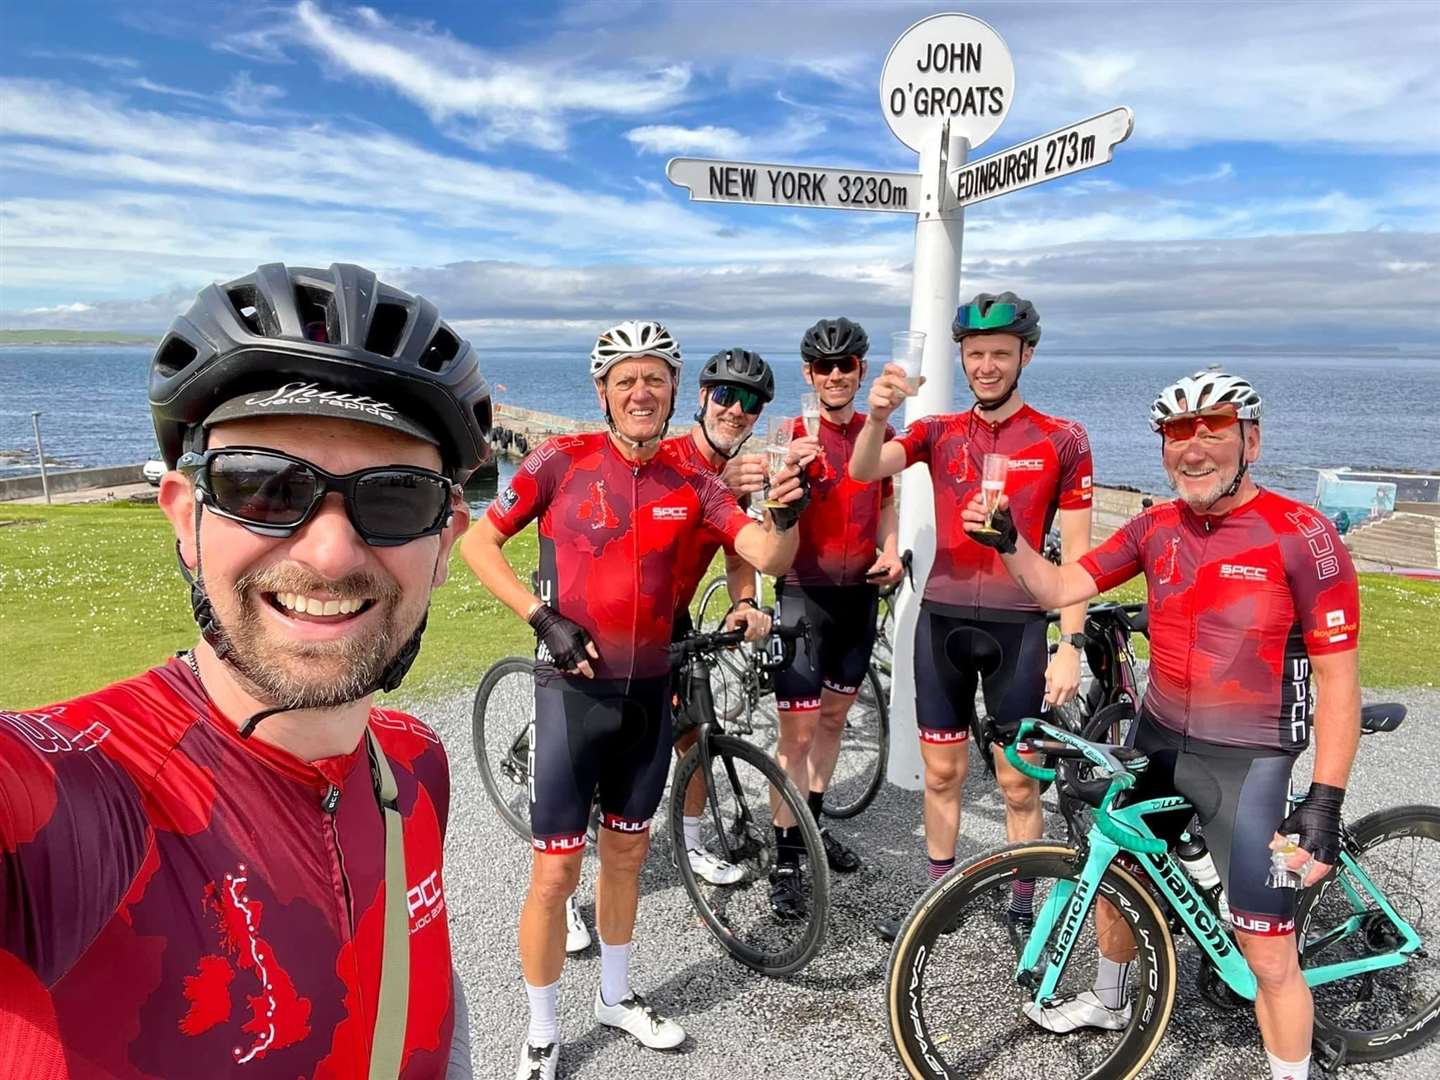 Members of the South Peaks Cycling Club Dan Swain, Chris Housley, Tim Dixon, John Holmes, Carl Jennison make it to John O'Groats after their charity Lejog journey on Tuesday afternoon.